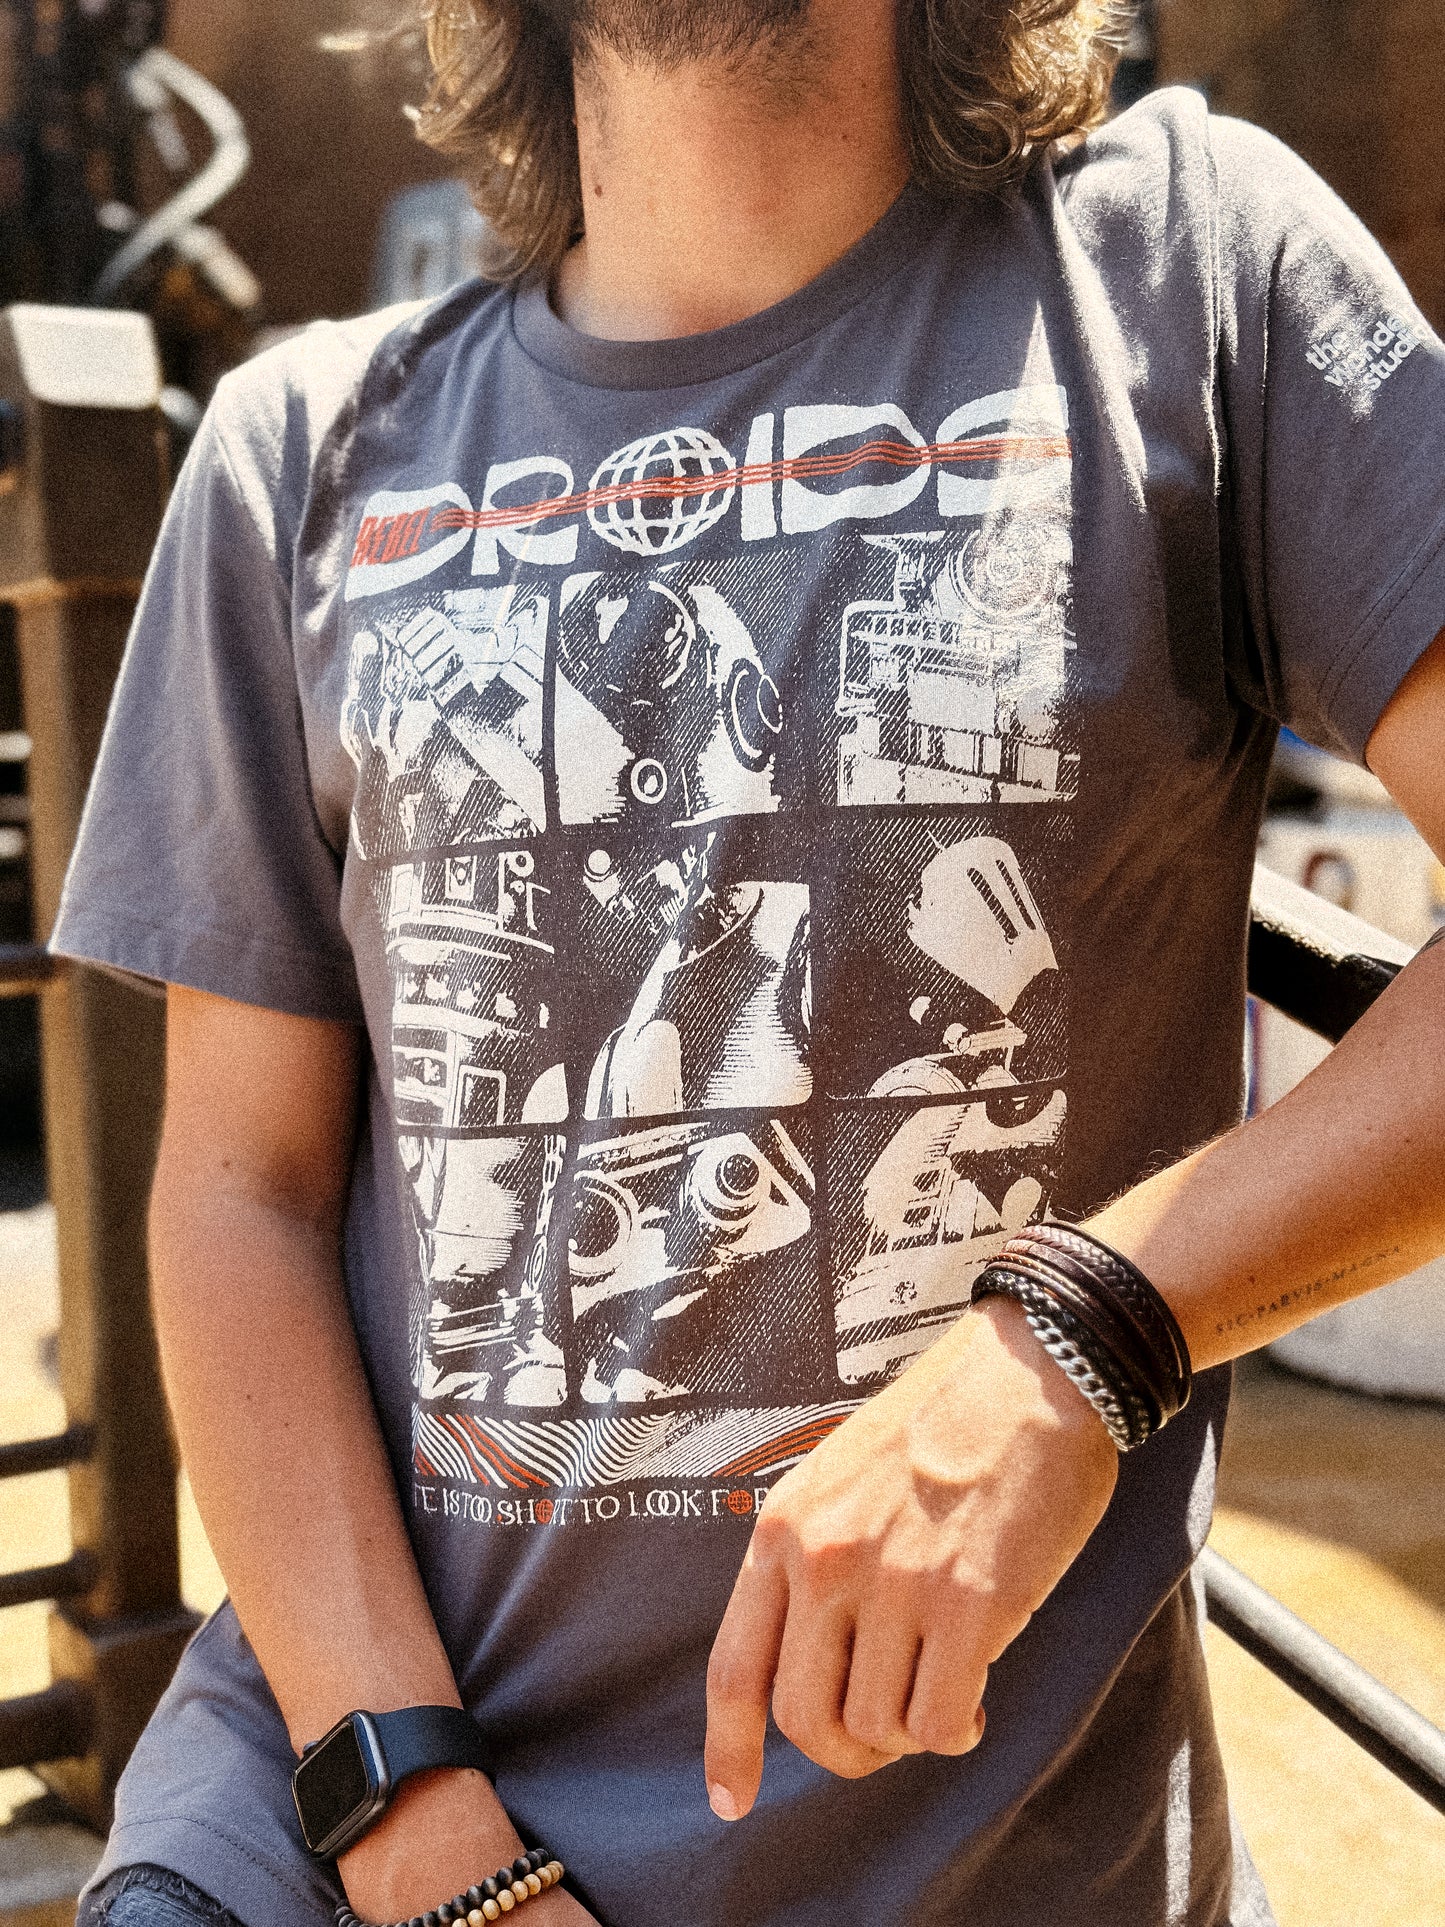 The Droids Tee